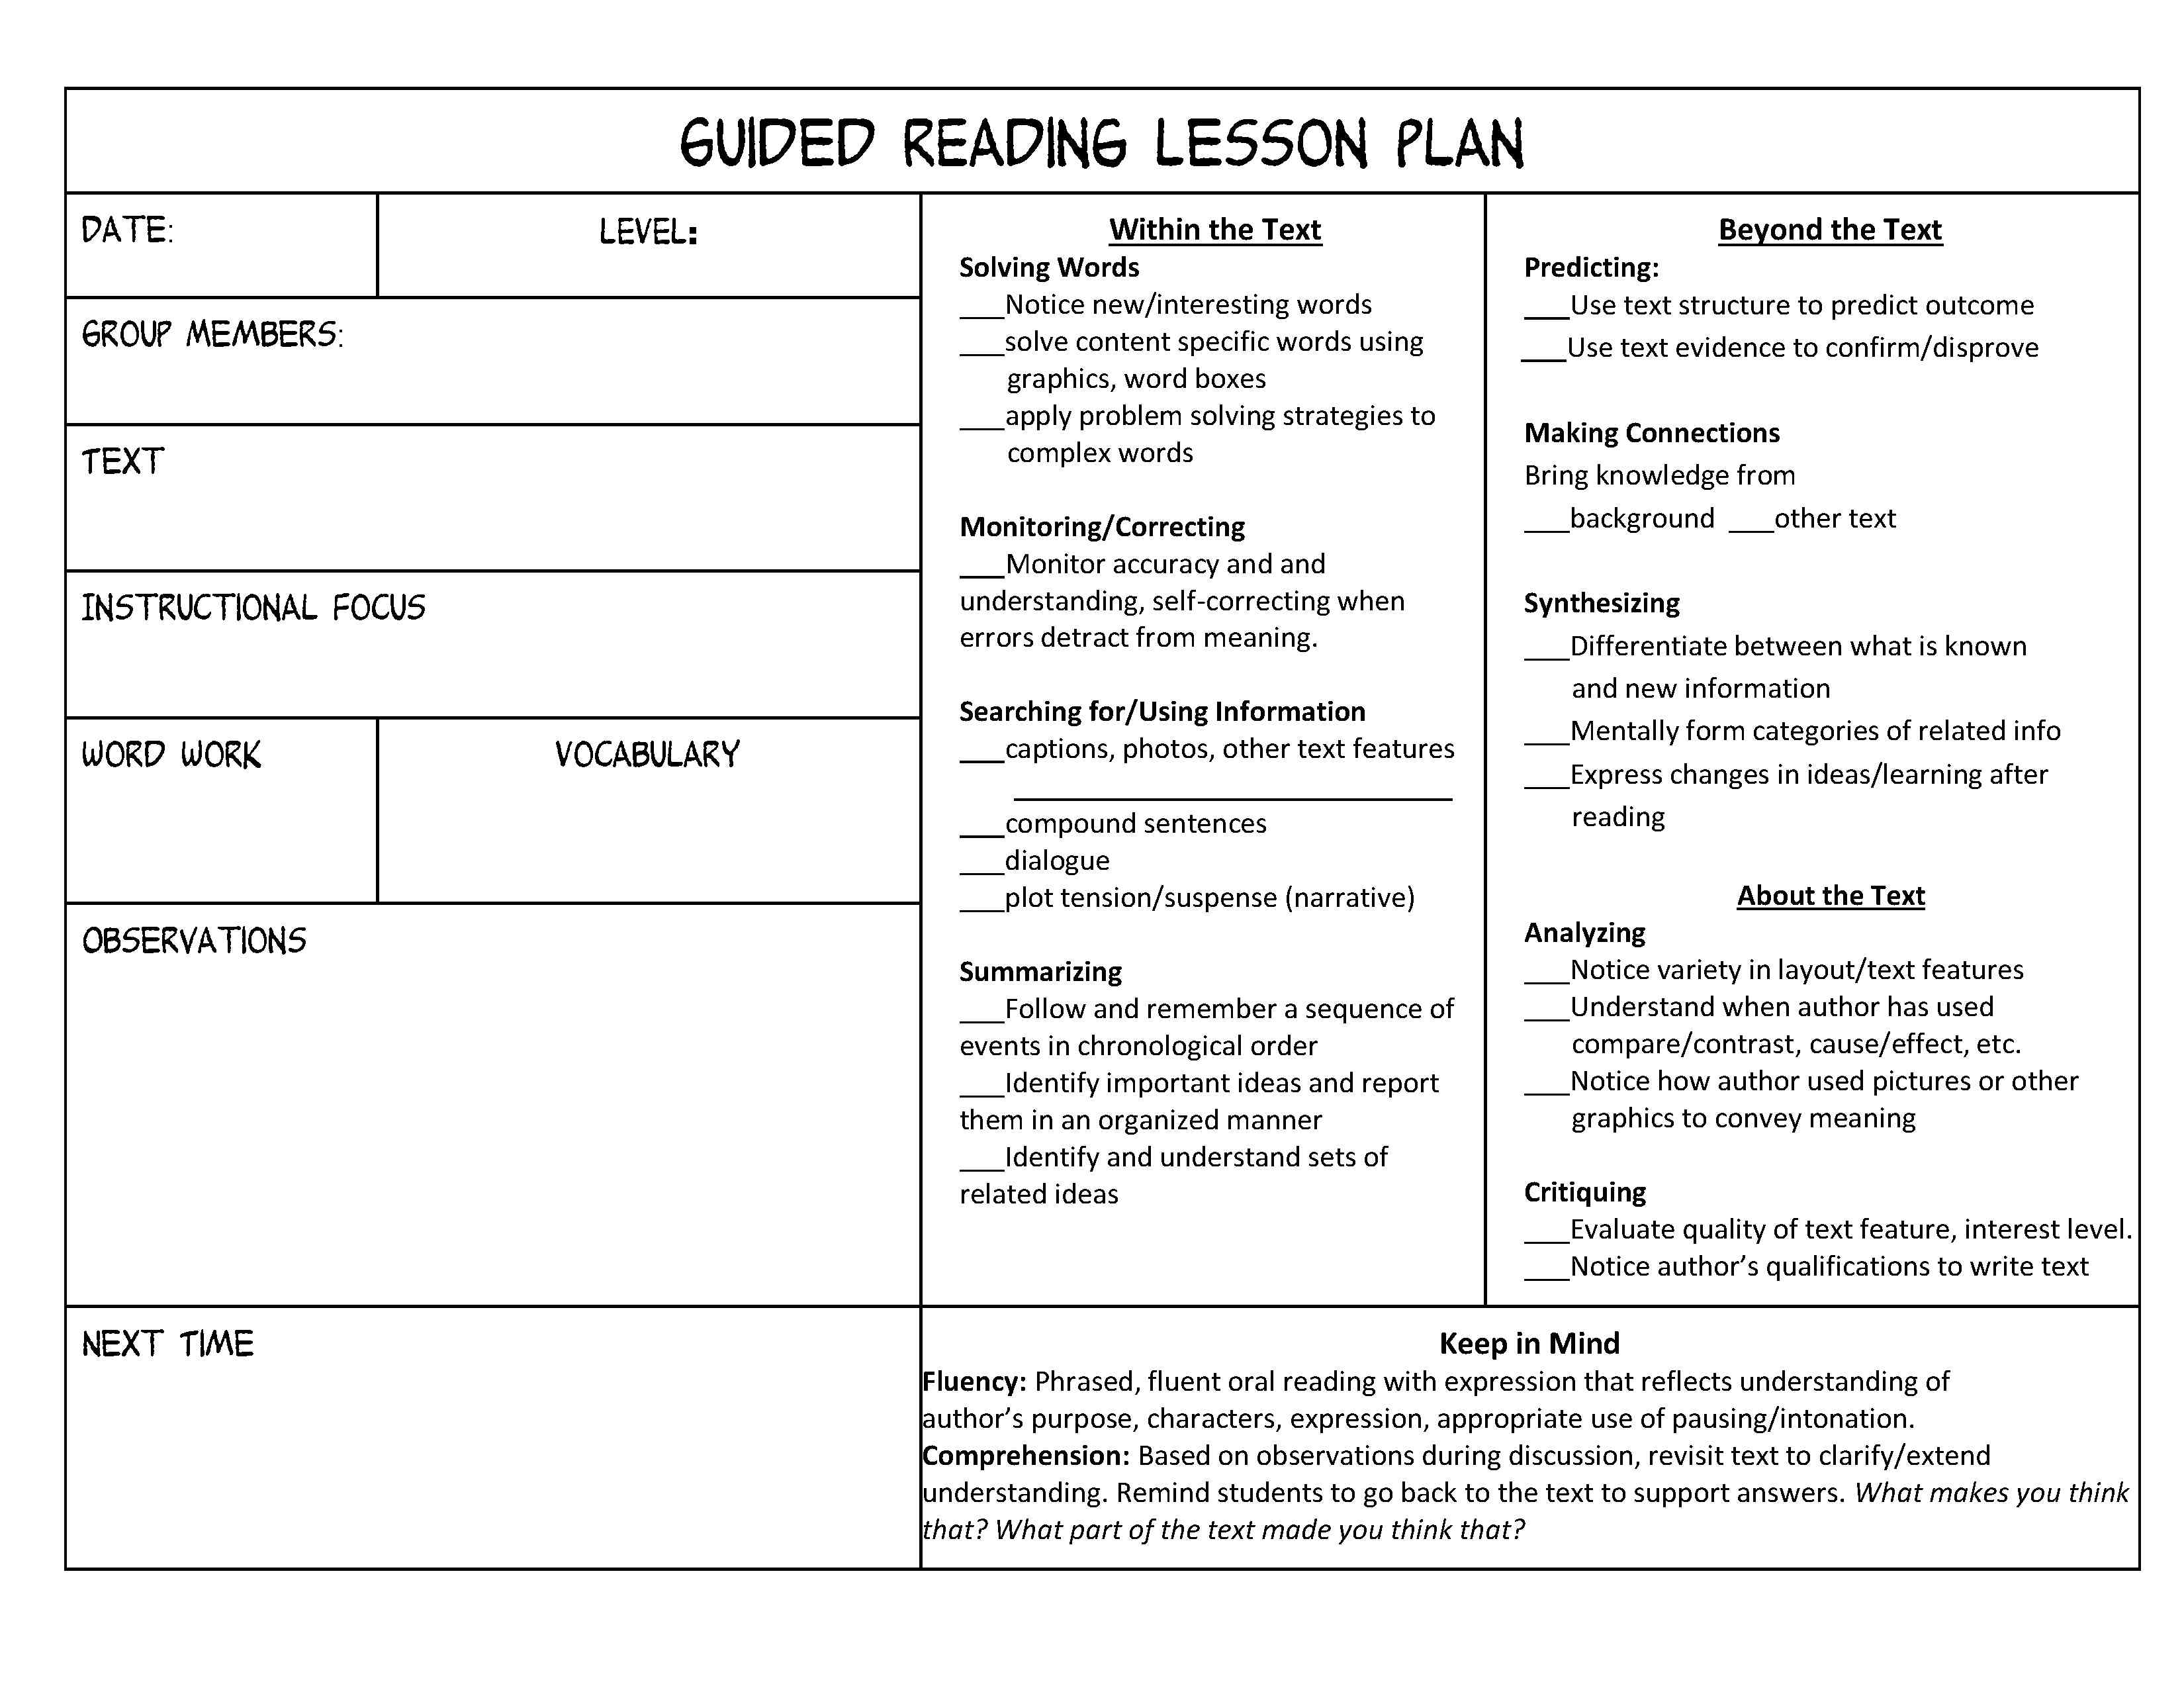 guided-reading-lesson-plan-what-is-a-financial-plan